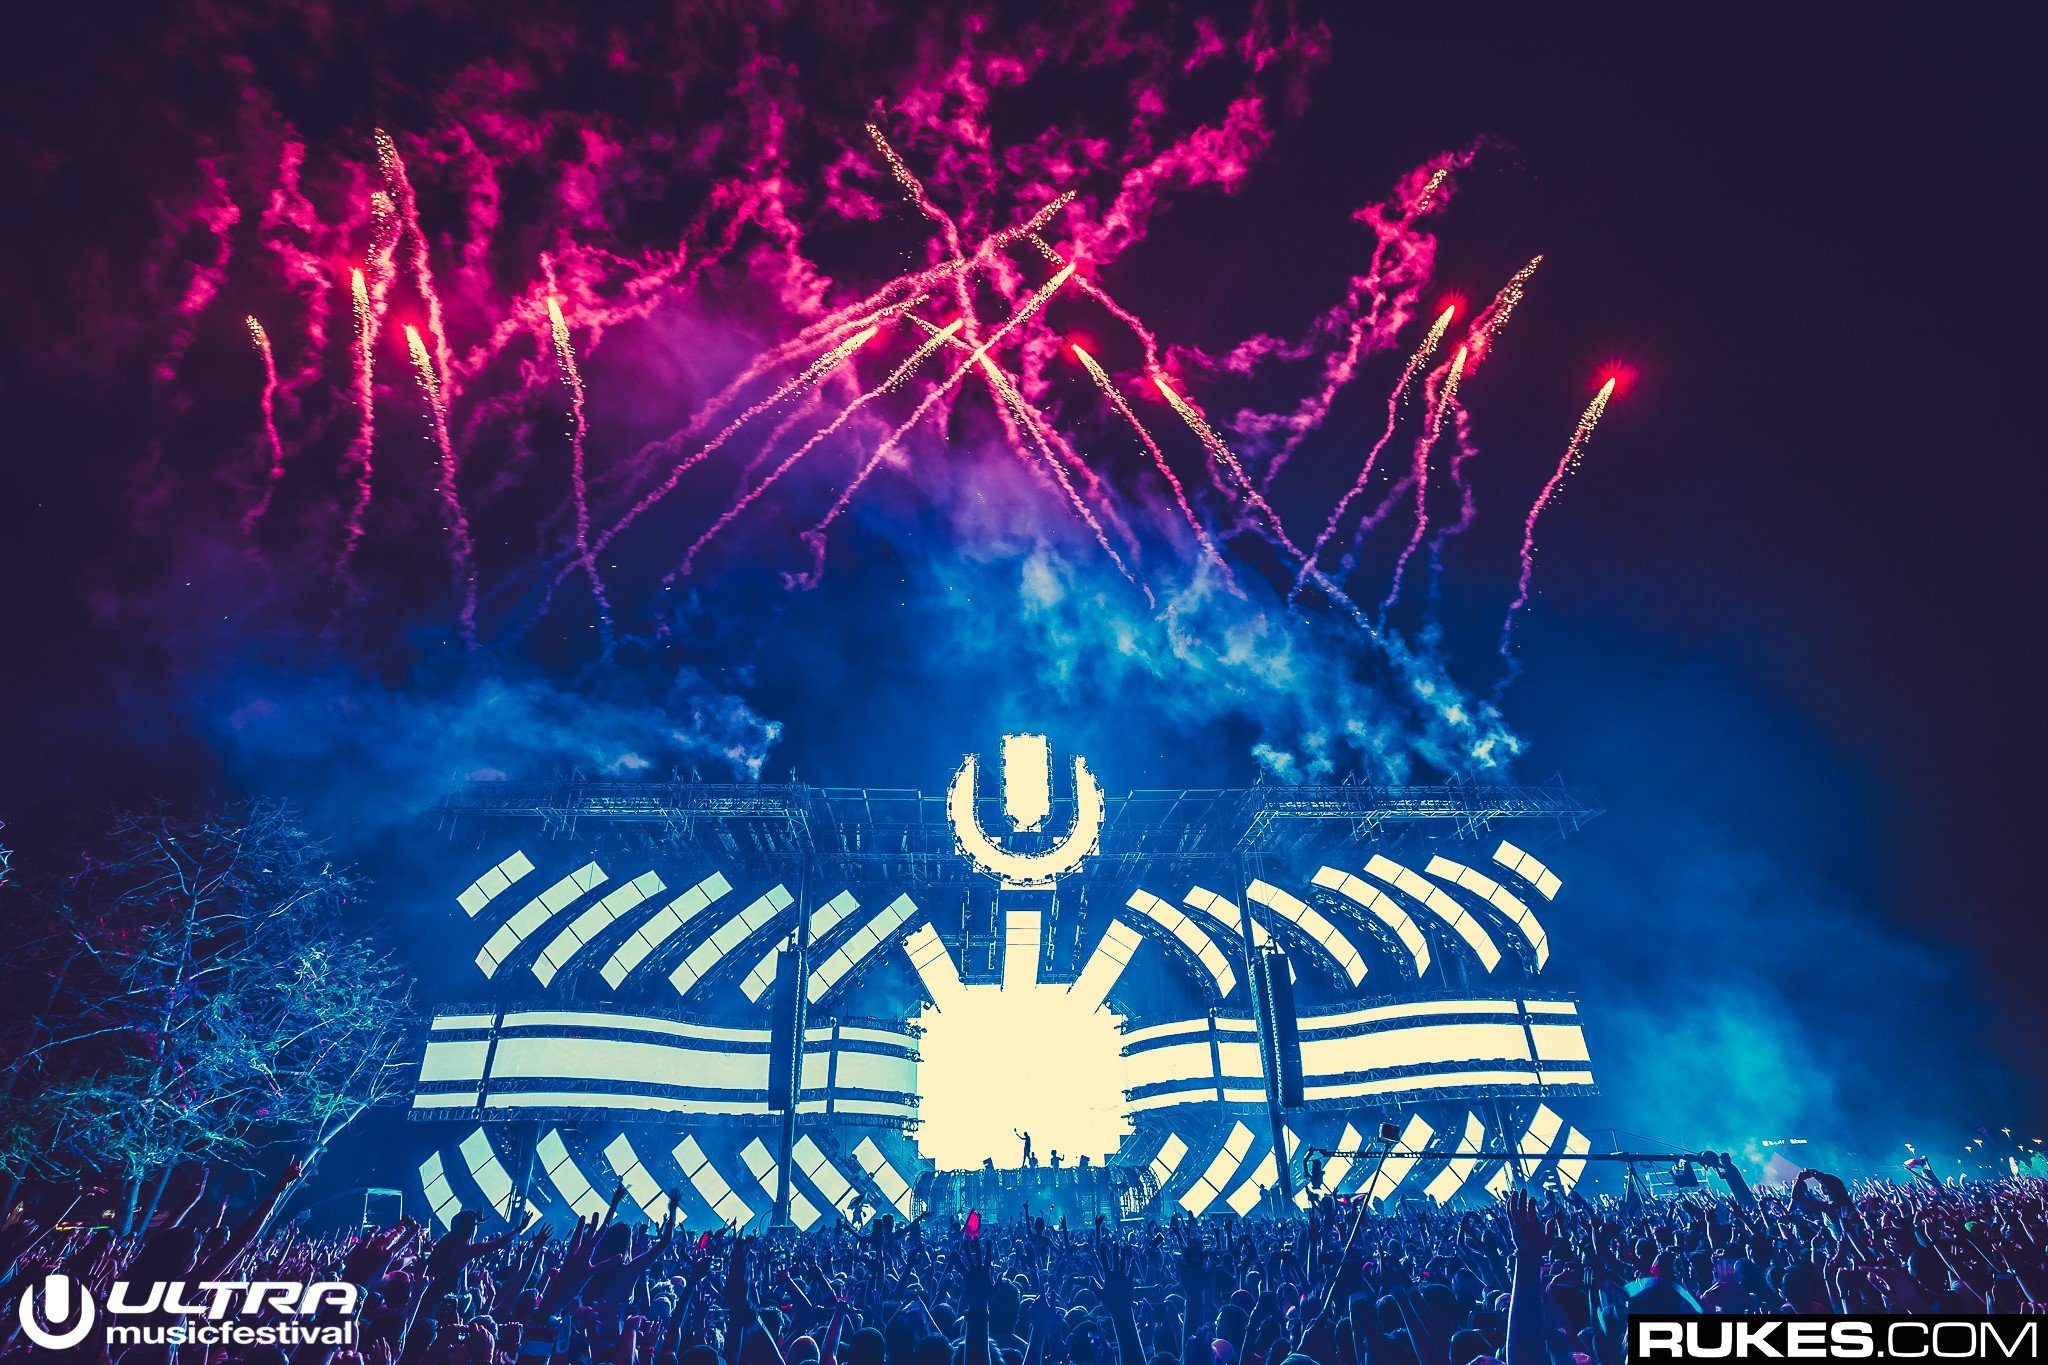 crowds, Ultra Music Festival, Rukes.com, Stages, Lights, Photography, Fireworks, Music Wallpaper